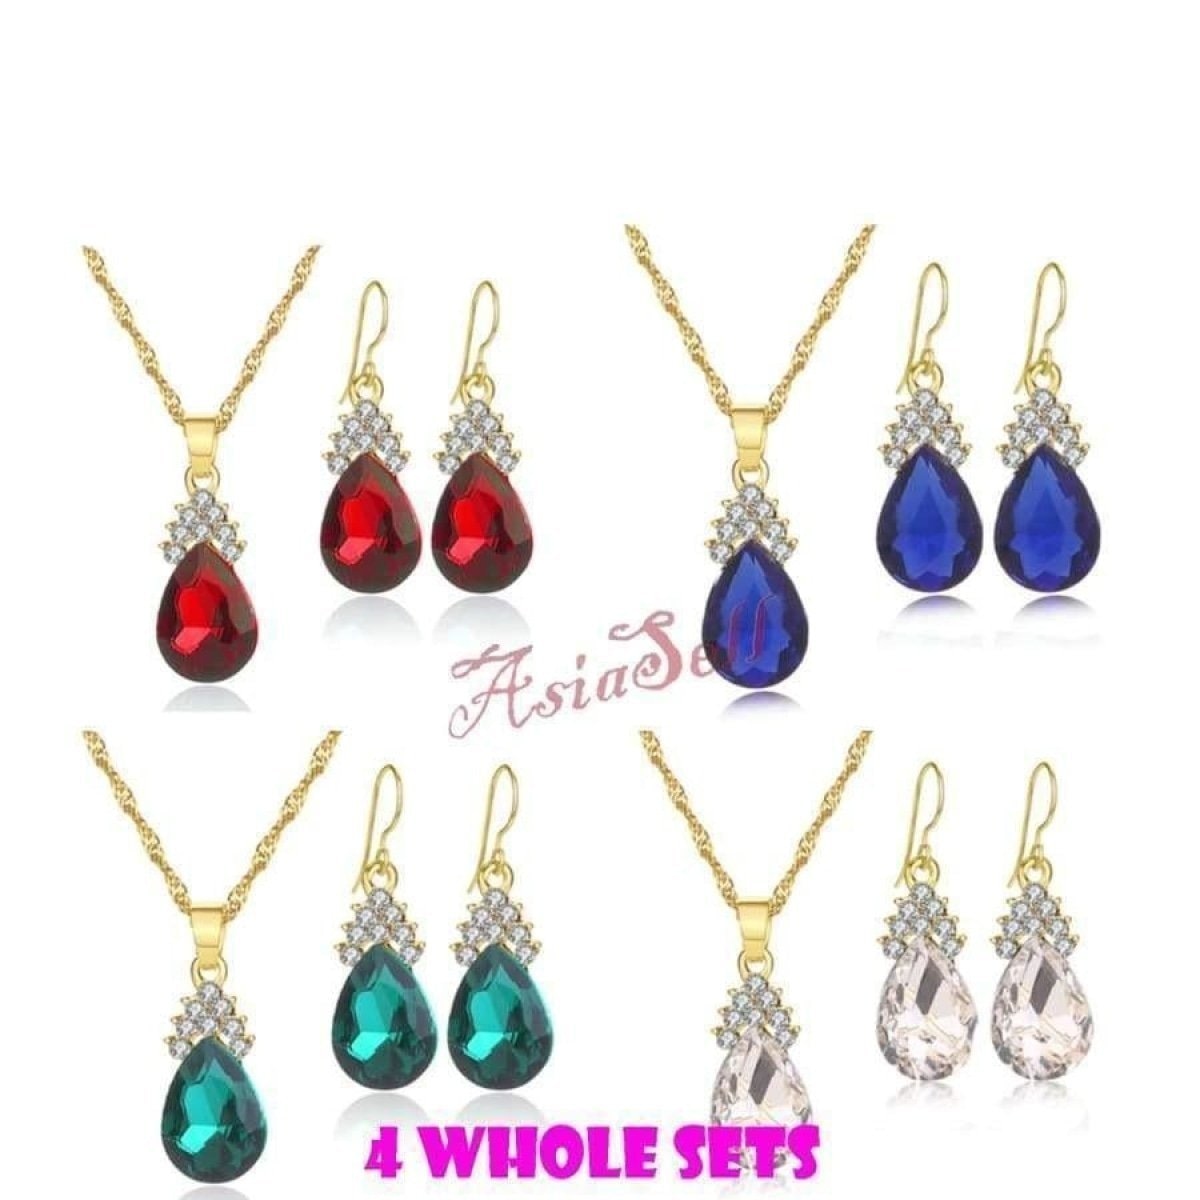 Necklace Earrings All 4 Sets Bridal Beads Party Jewellery Teardrop Accessories Necklaces